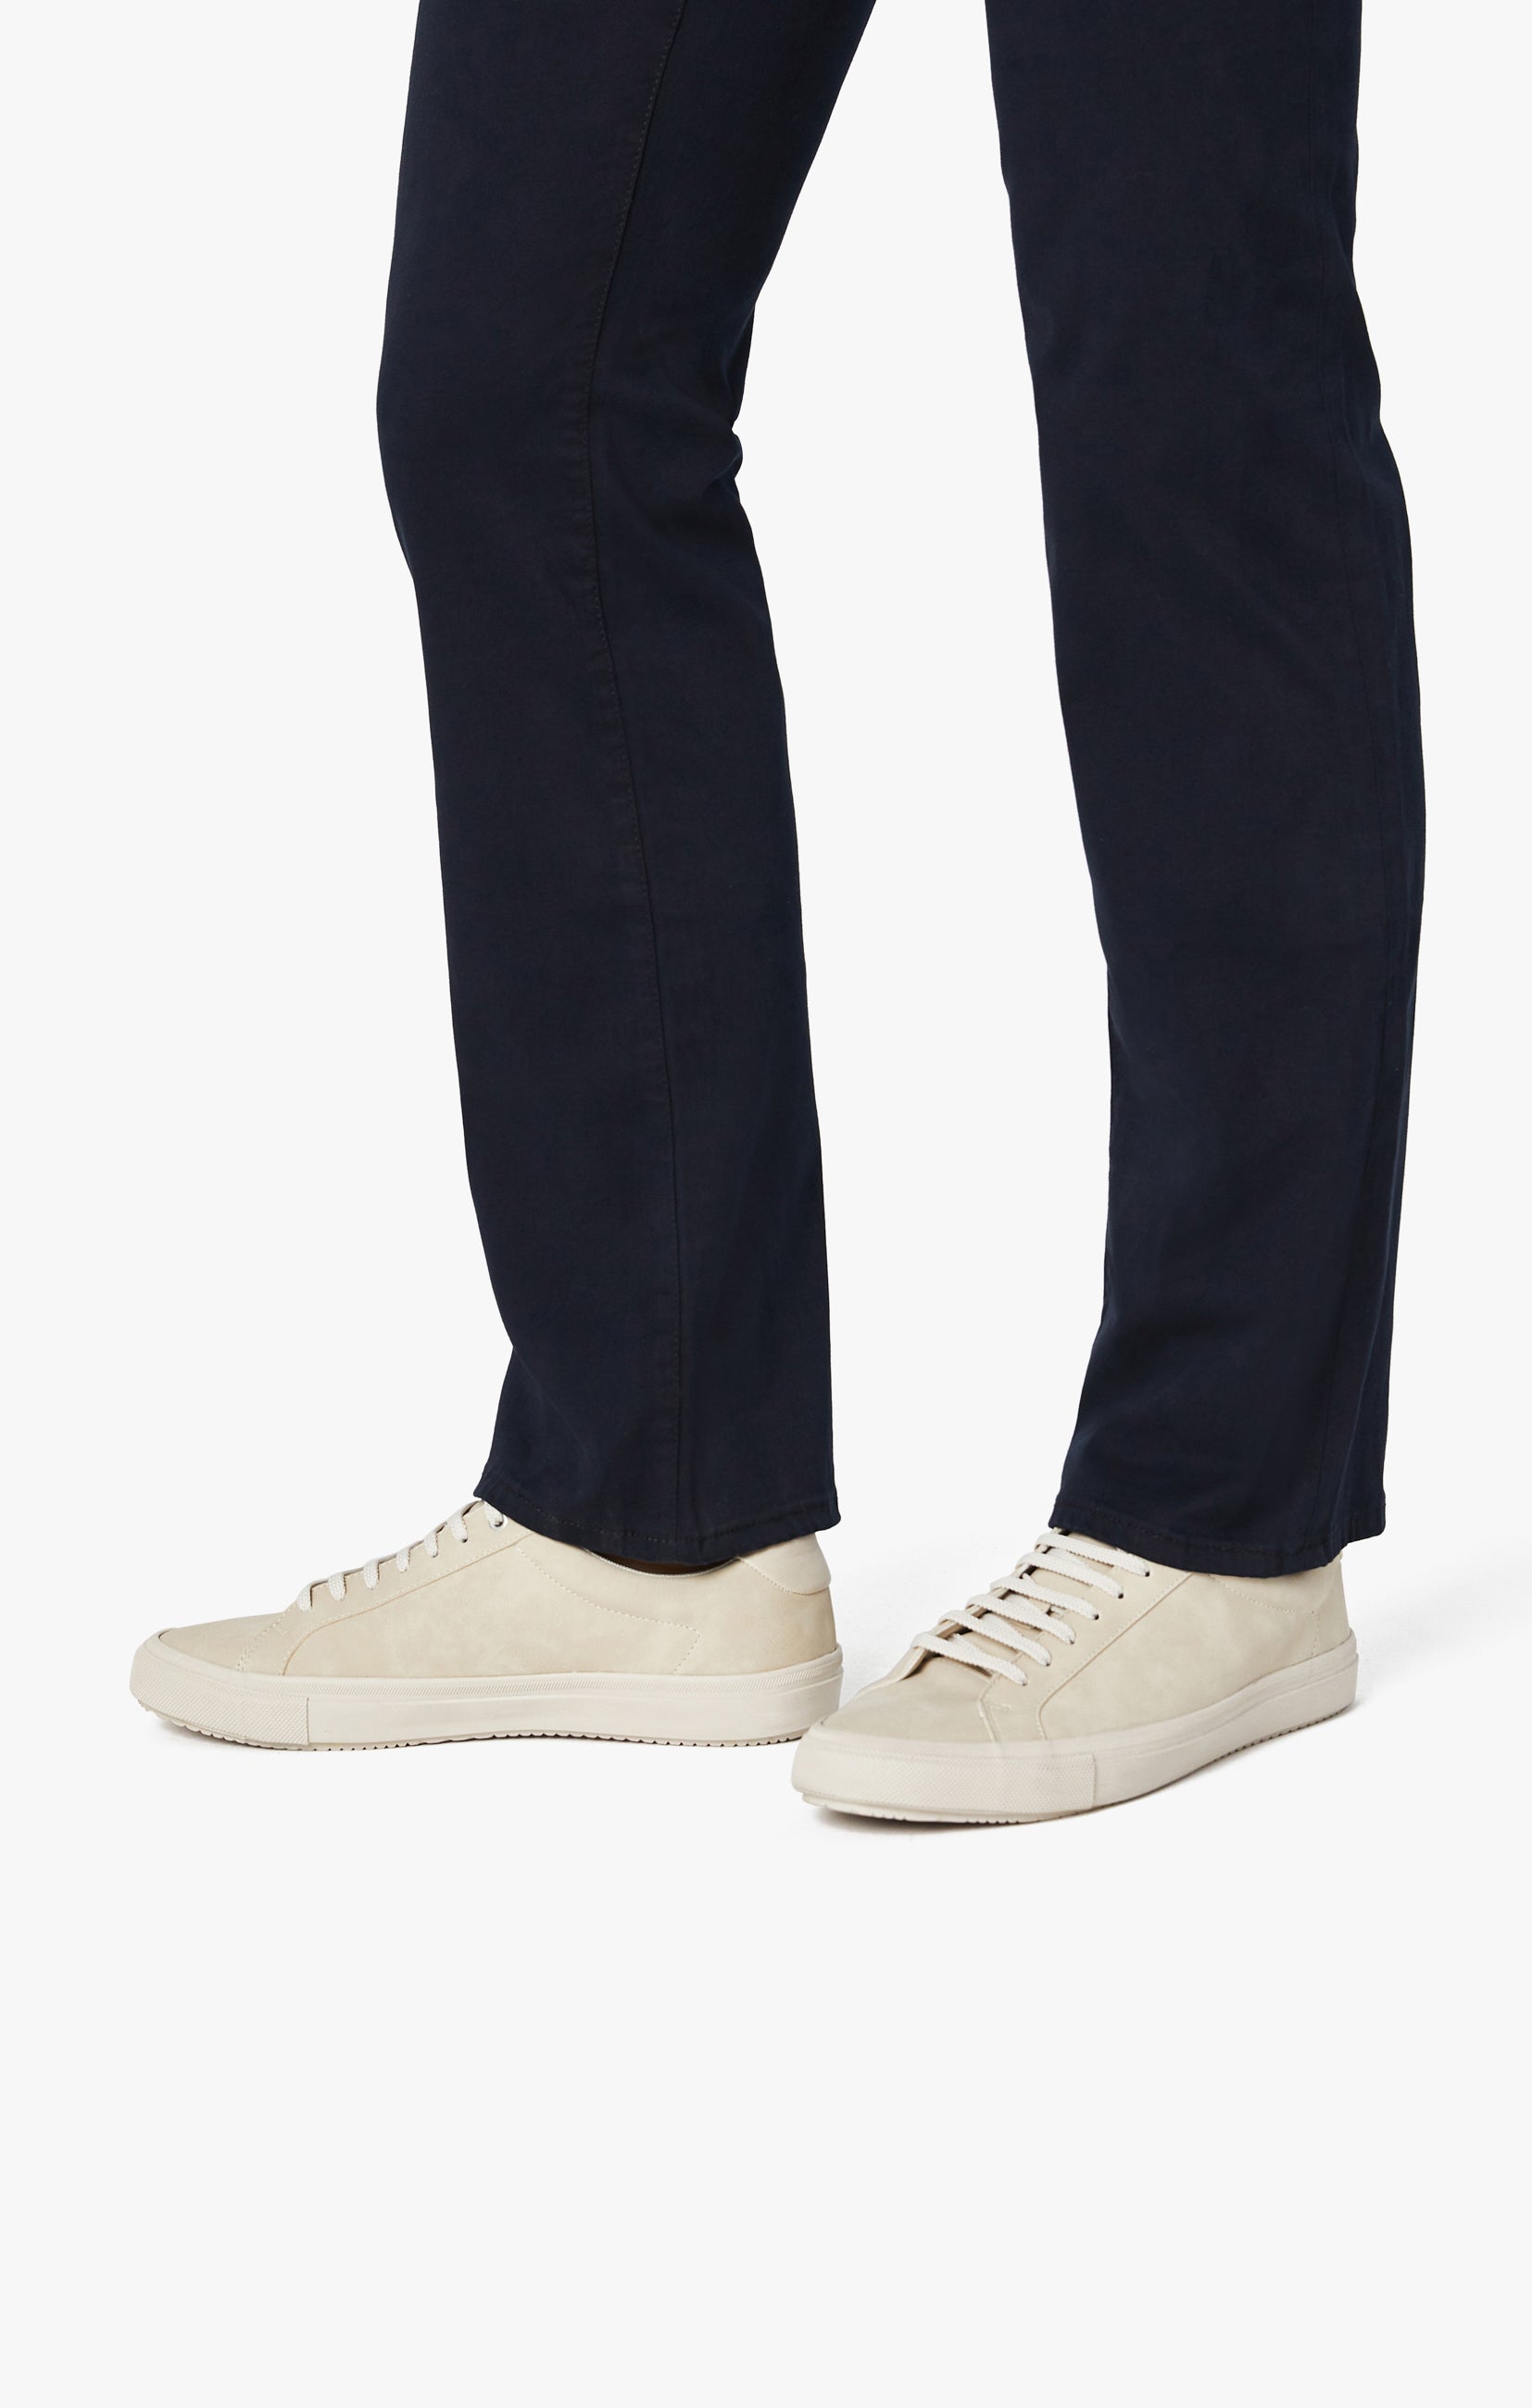 Charisma Classic Fit Pants in Navy Twill Image 10